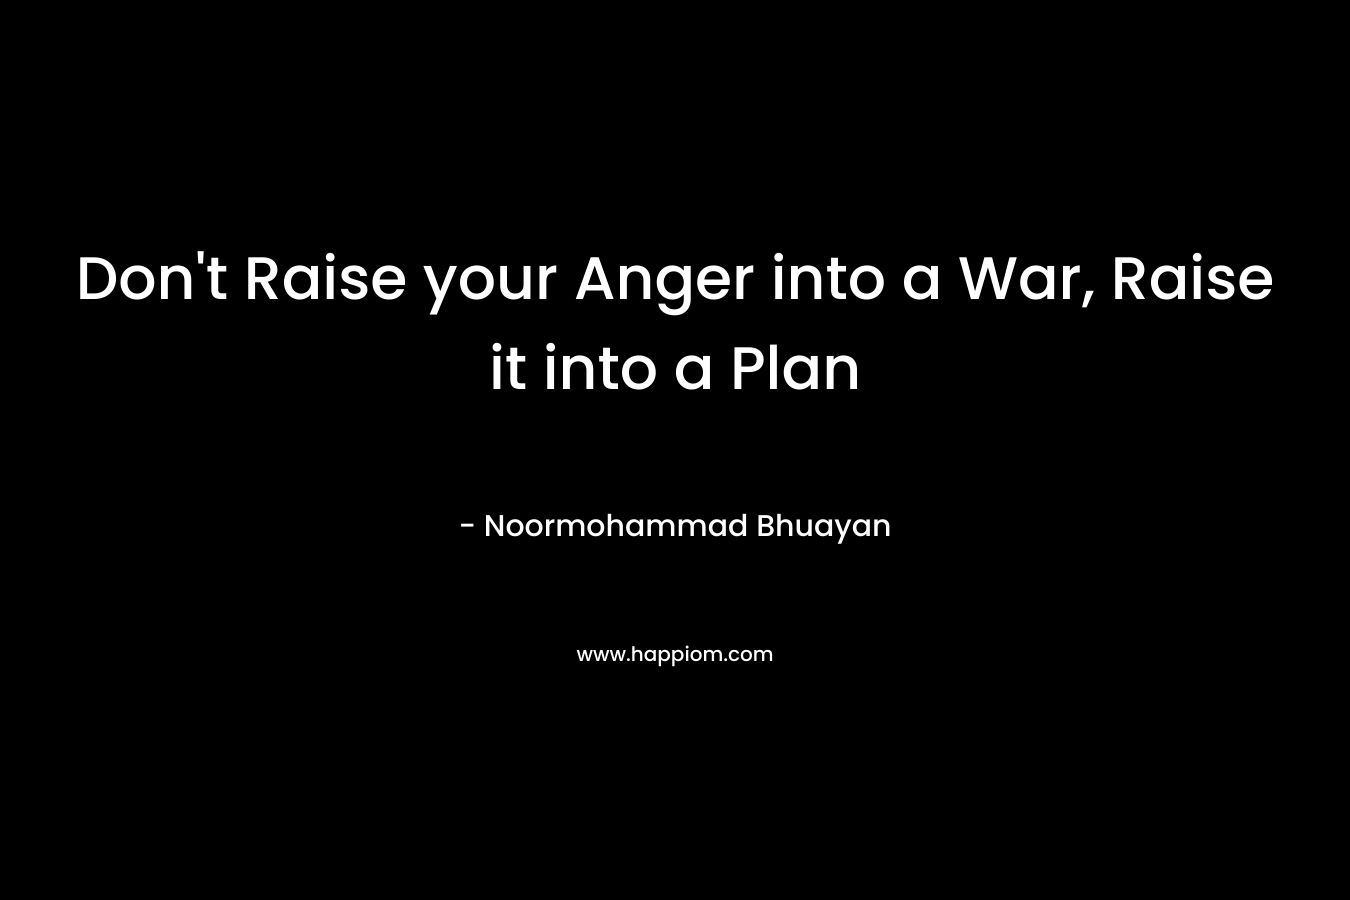 Don't Raise your Anger into a War, Raise it into a Plan